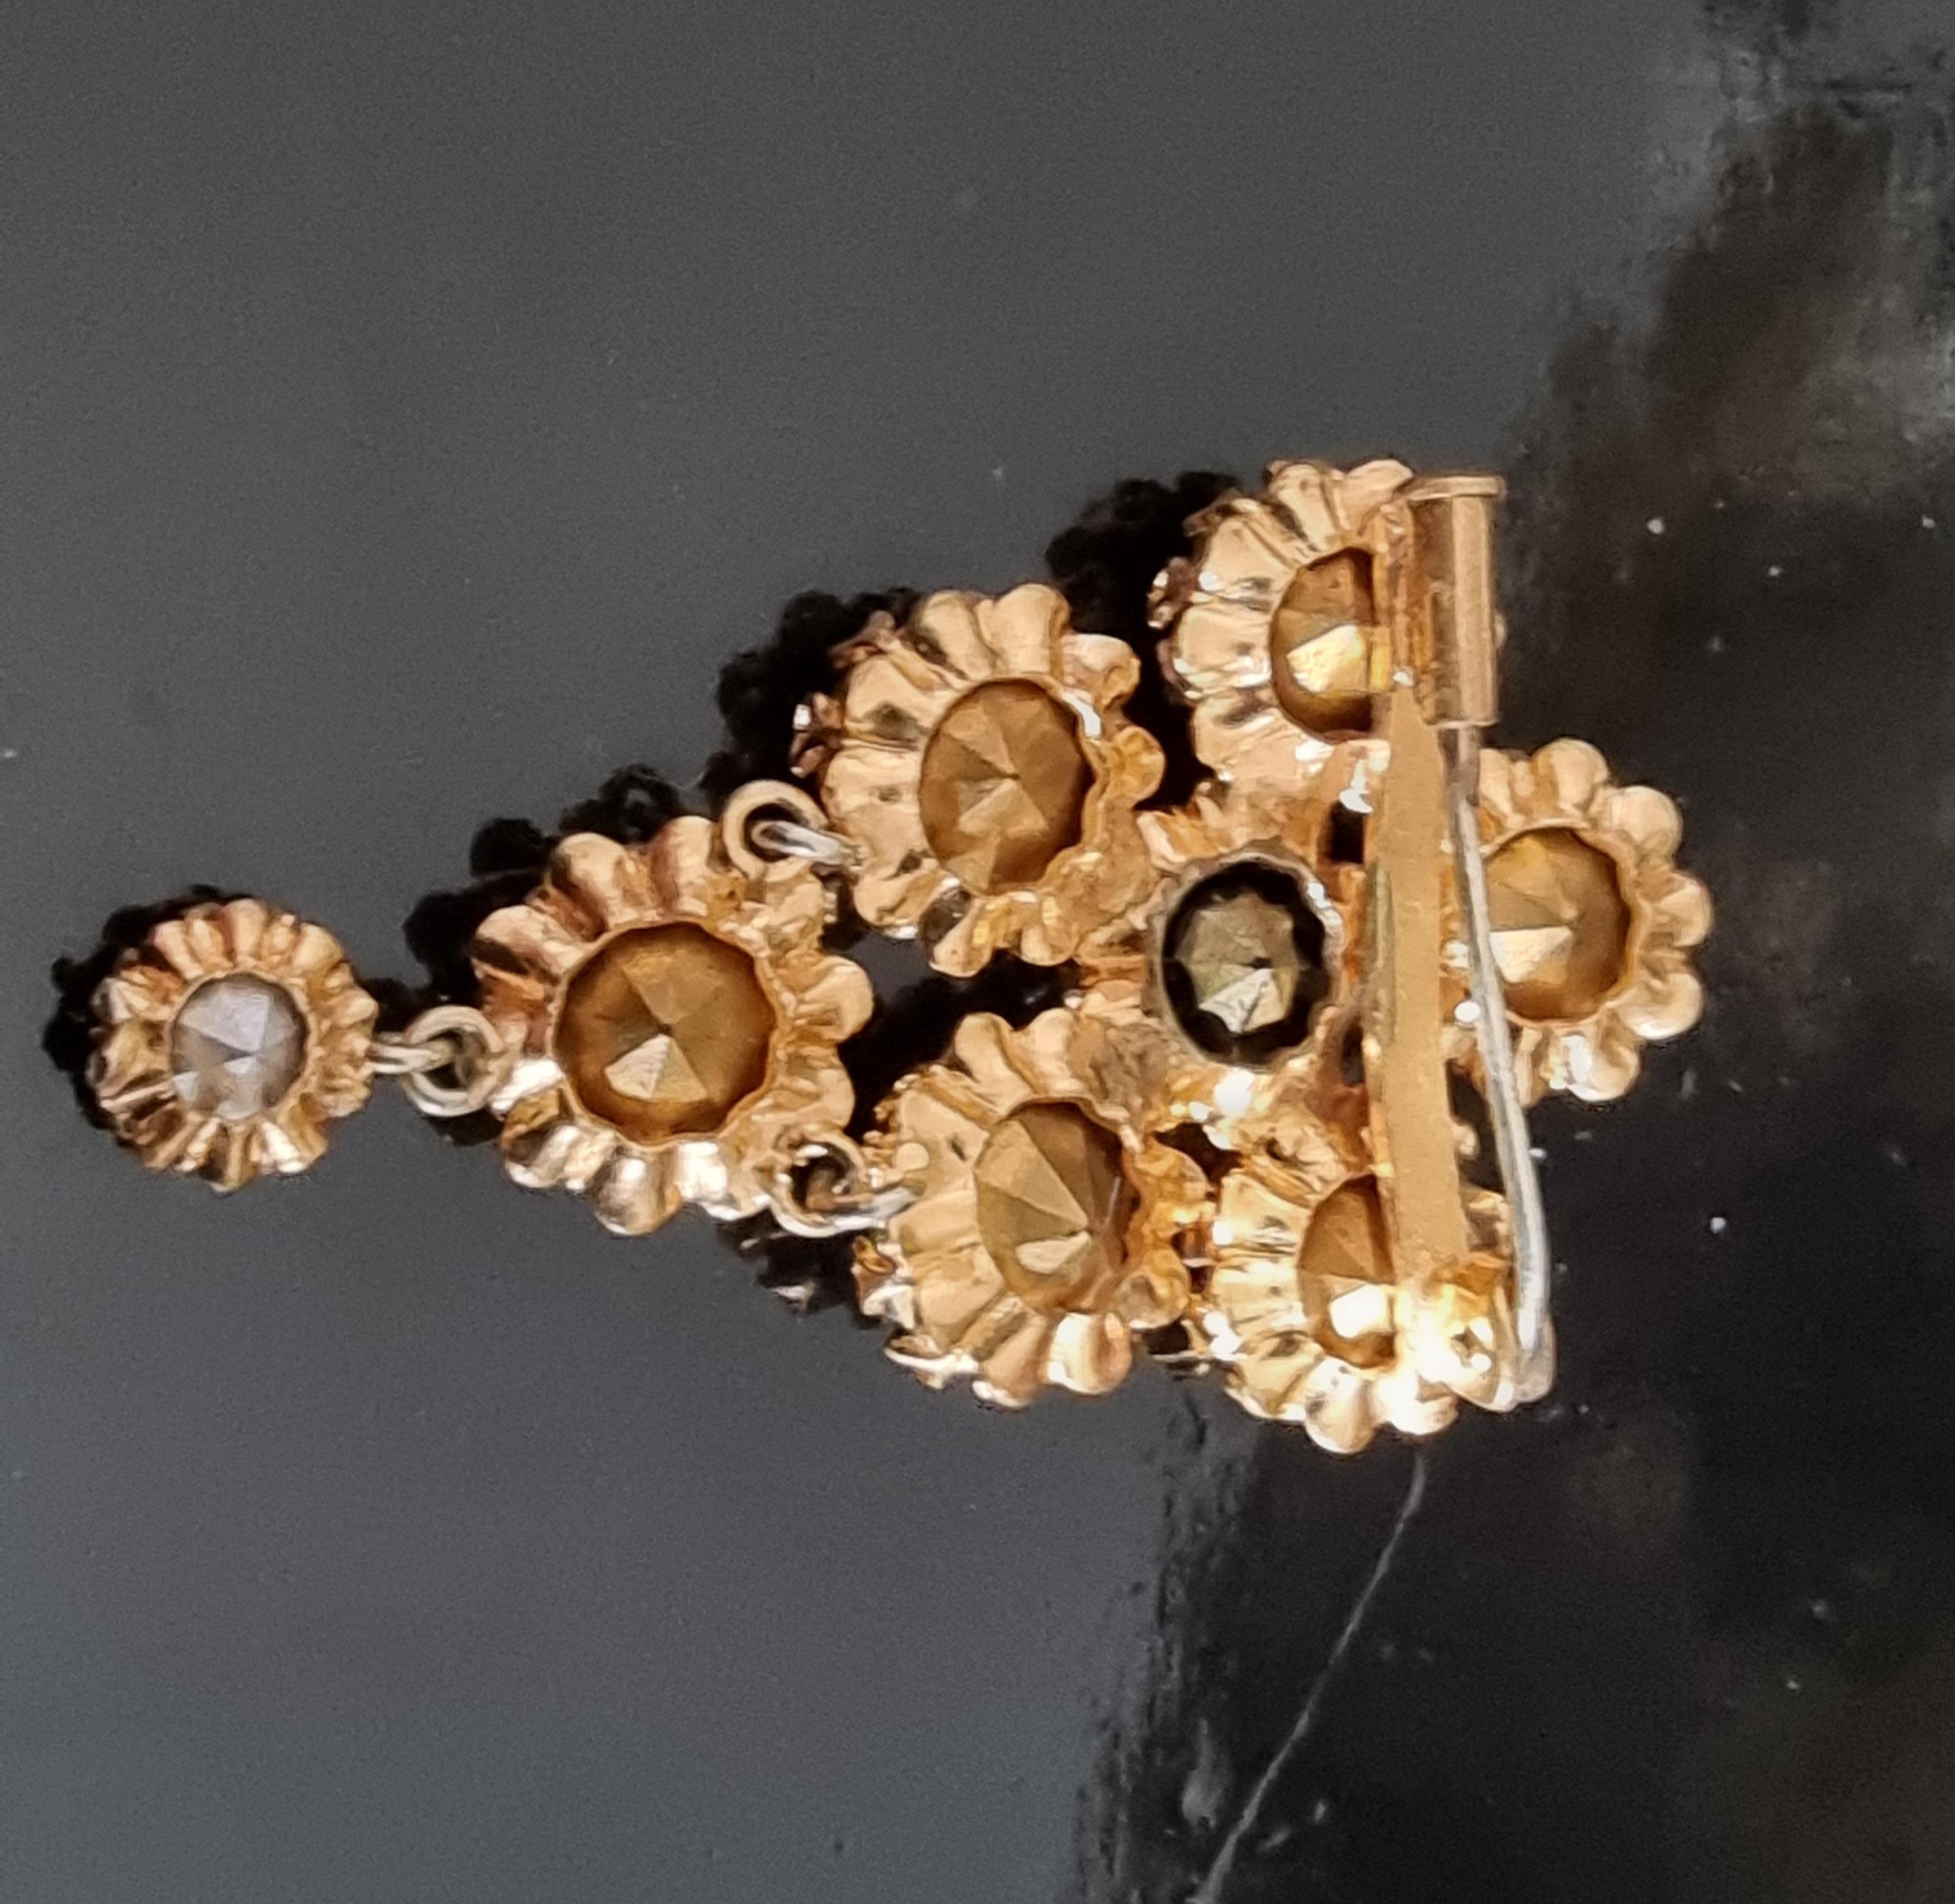 Women's CIS countess Cissy ZOLTOWSKA, Magnificent old BROOCH, vintage 50s, High Fashion For Sale